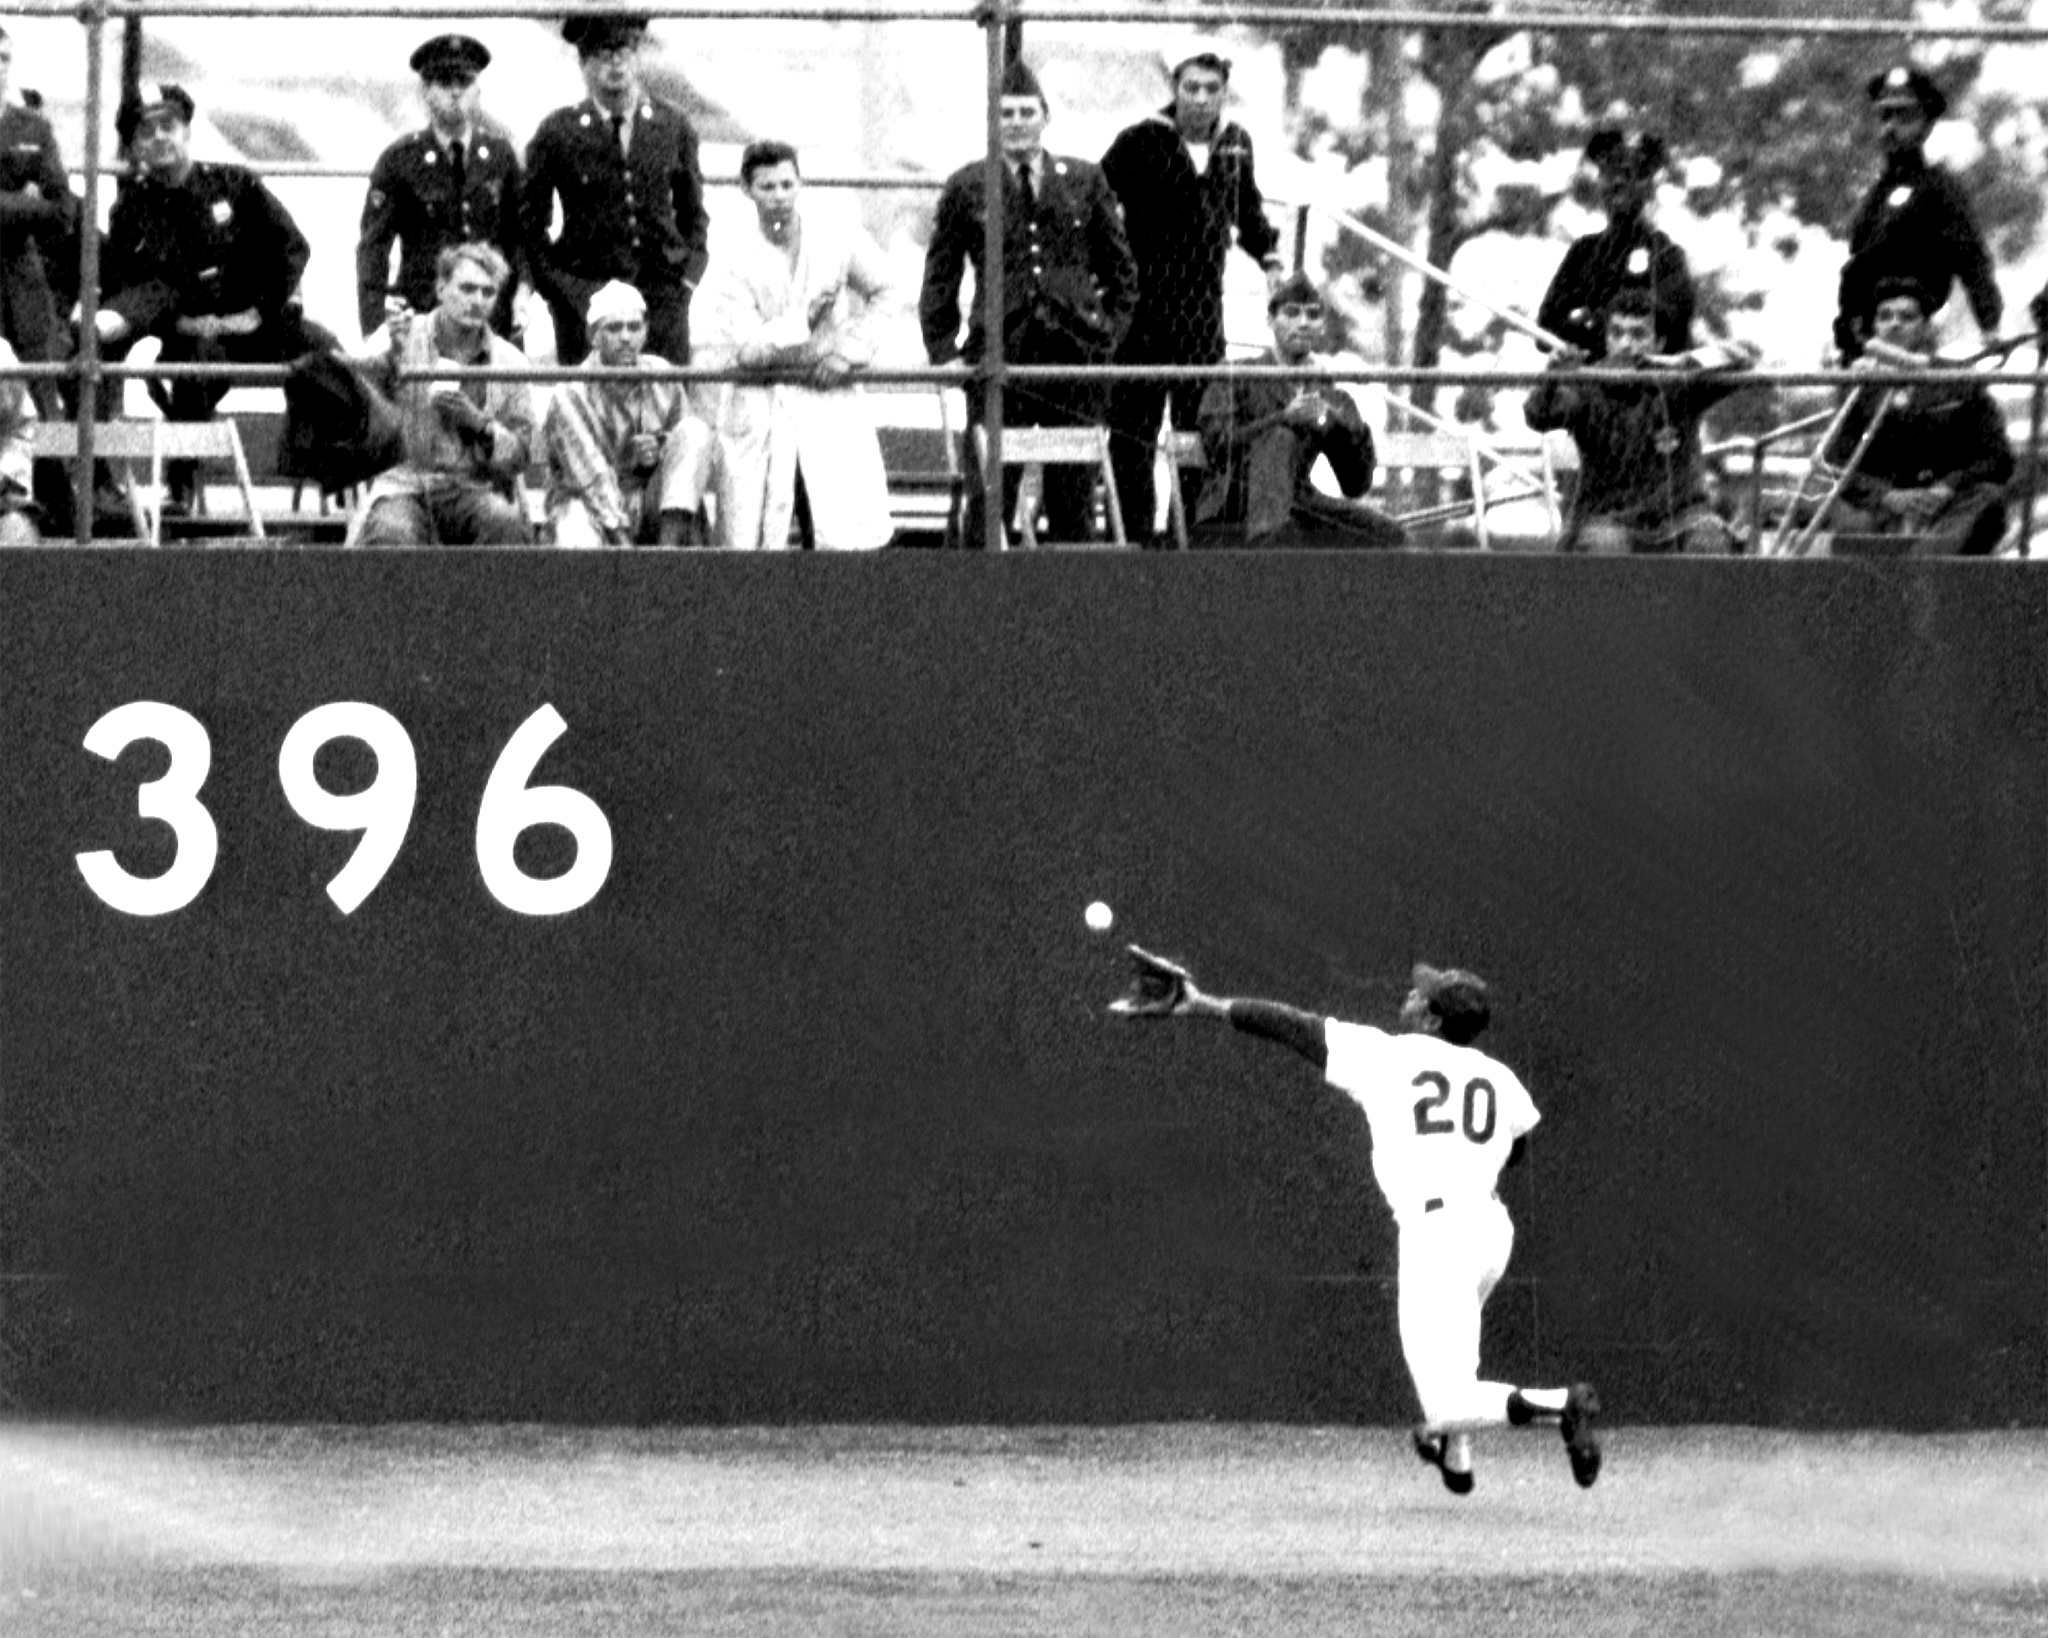 Tommie Agee: 1969 World Series, Game 3 - Greatest OF catches in MLB